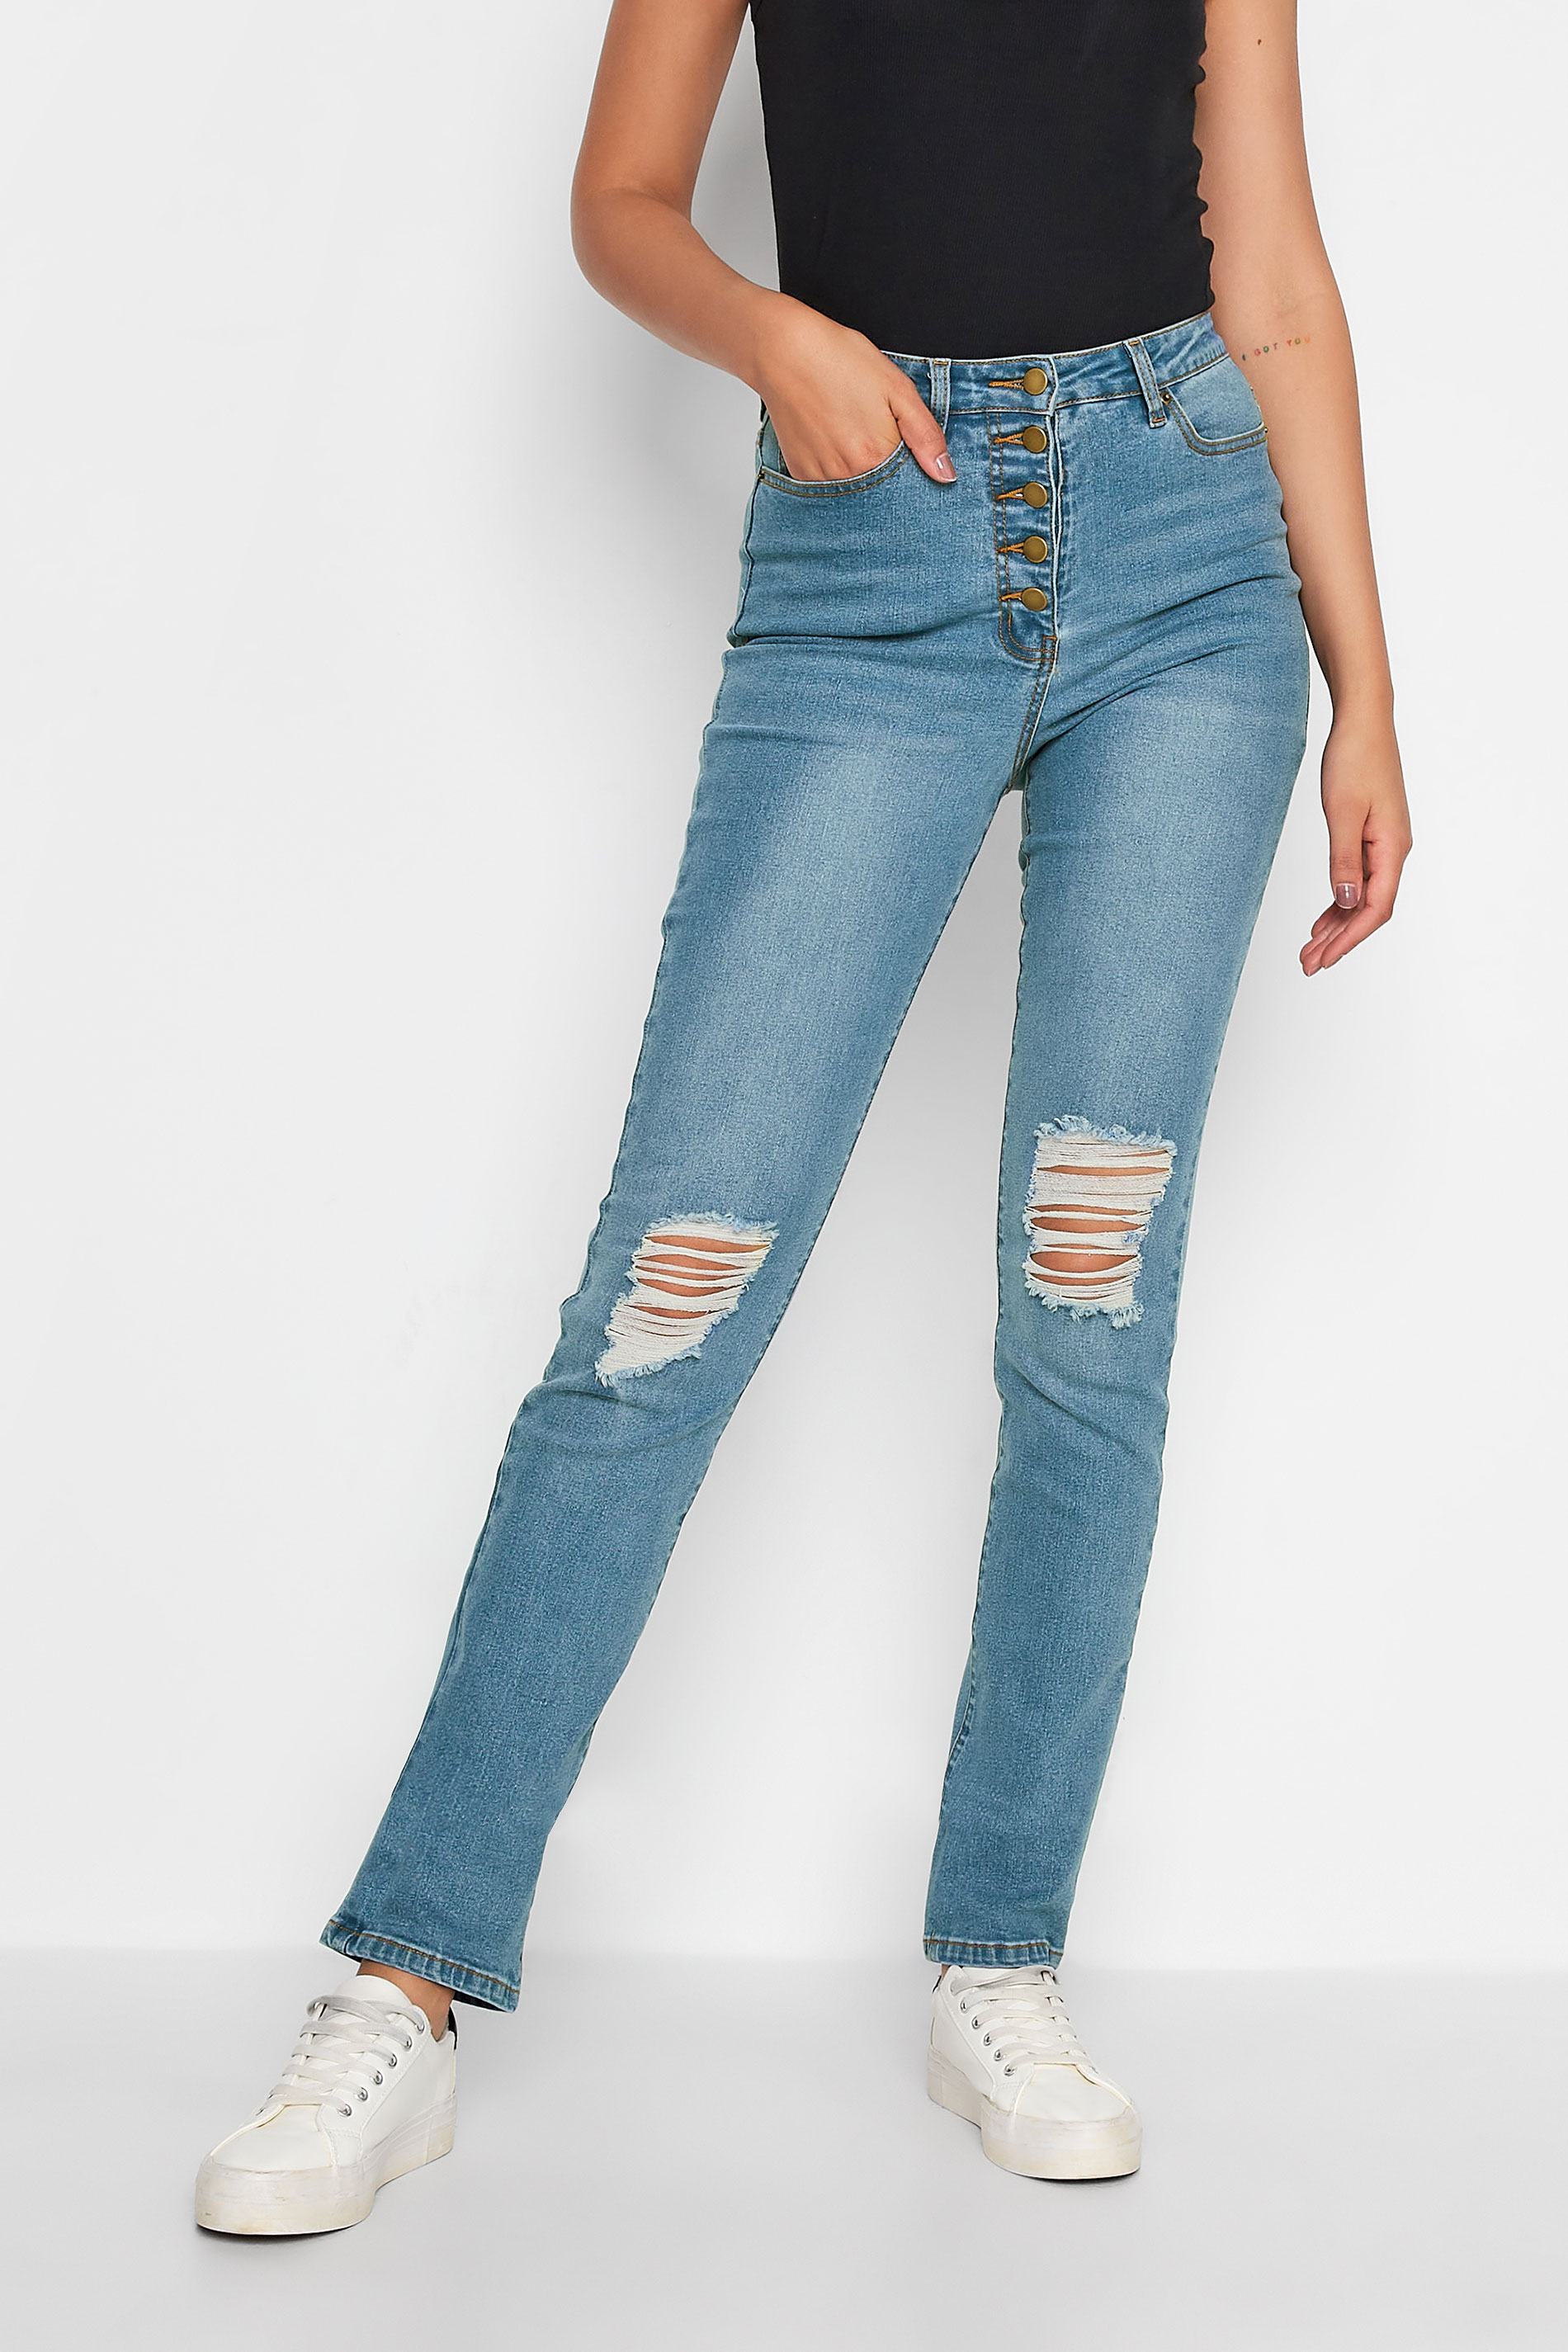 LTS Tall Women's Blue Button Fly Distressed Slim Jeans | Long Tall Sally 1